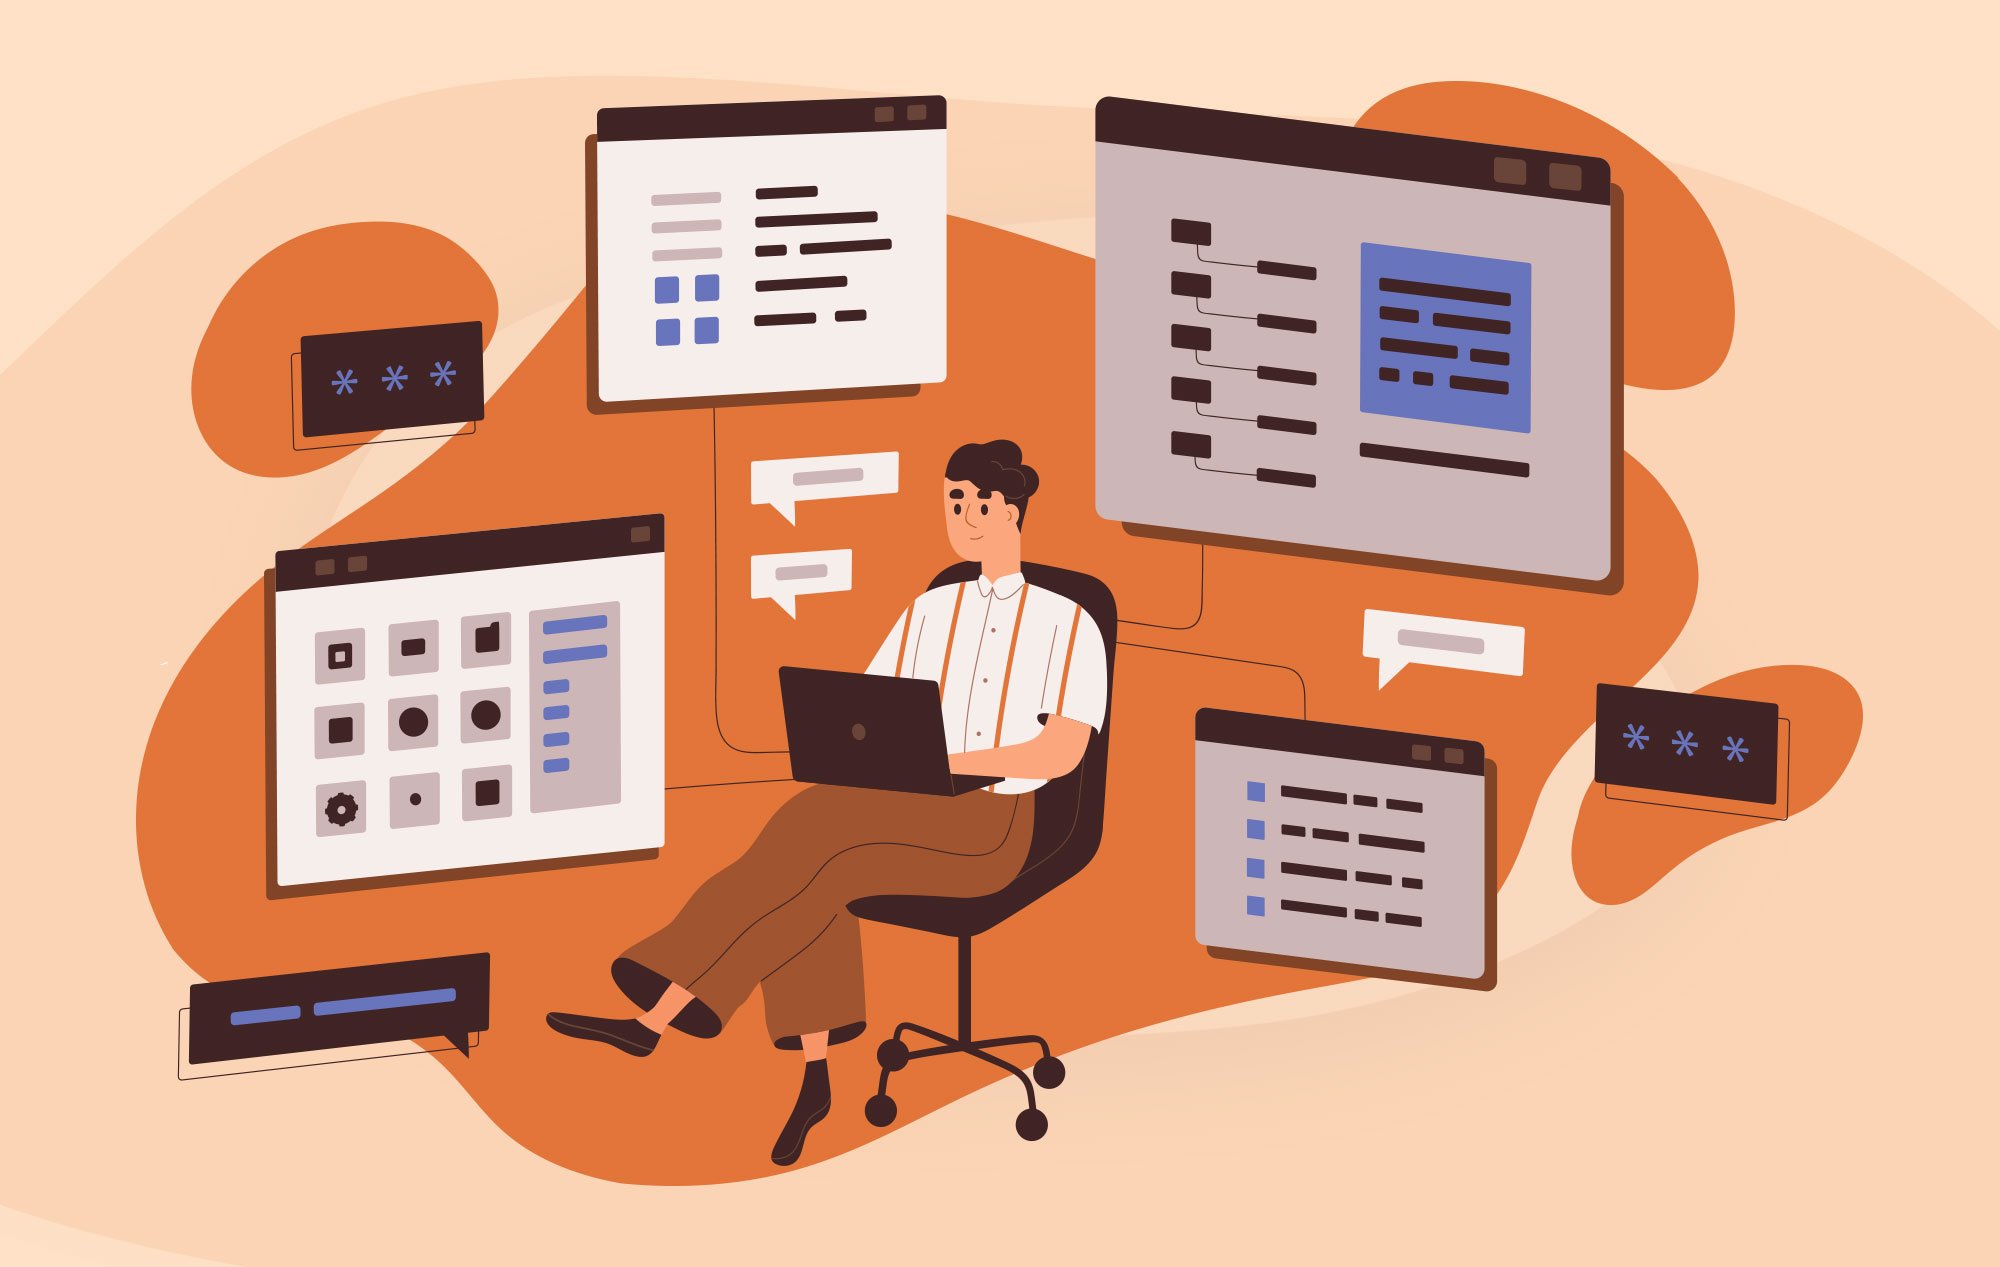 Illustration of a person sitting at a computer with floating modals surrounding them.